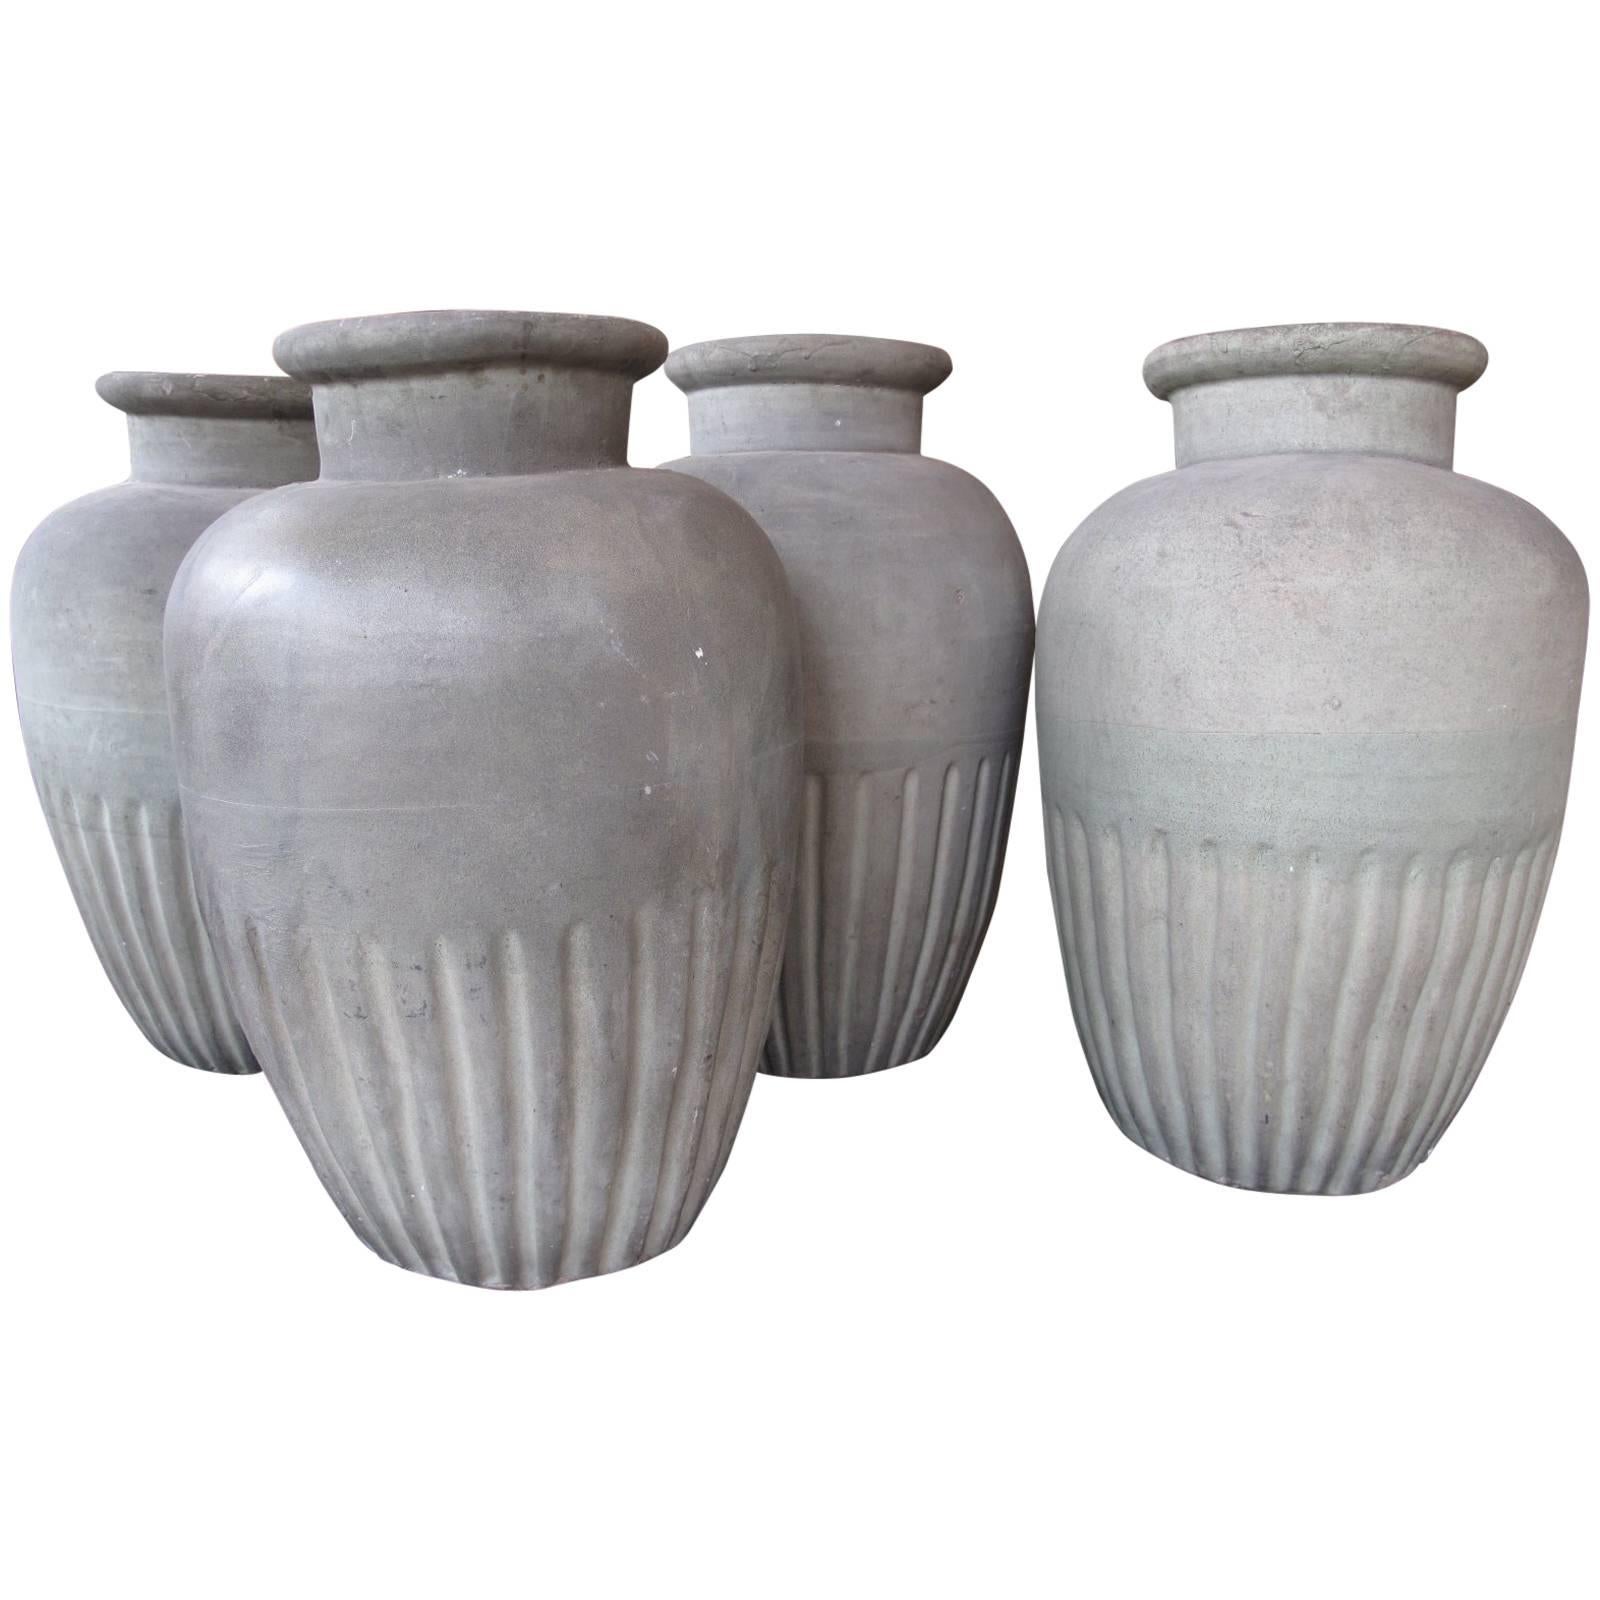 Collection of Italian Ceramic Vessels